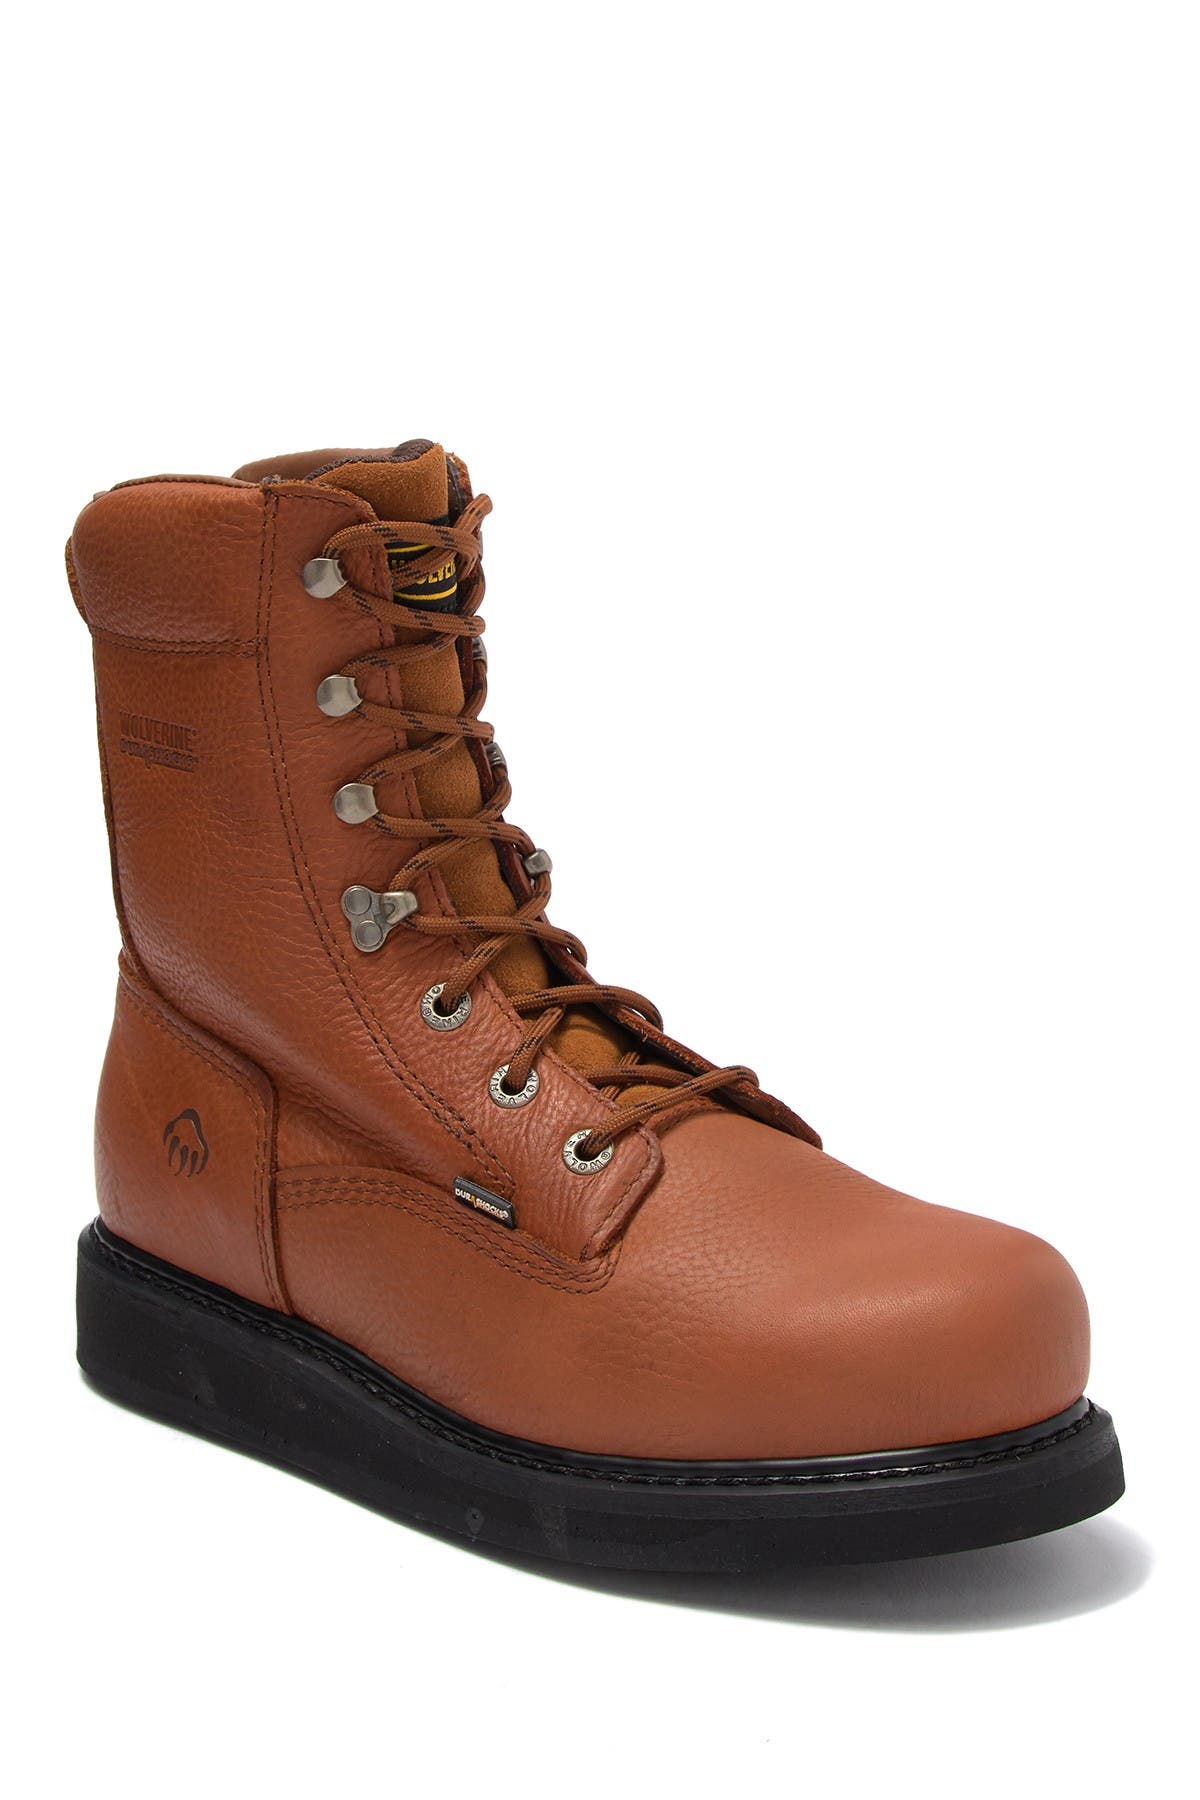 wolverine wedge sole boots